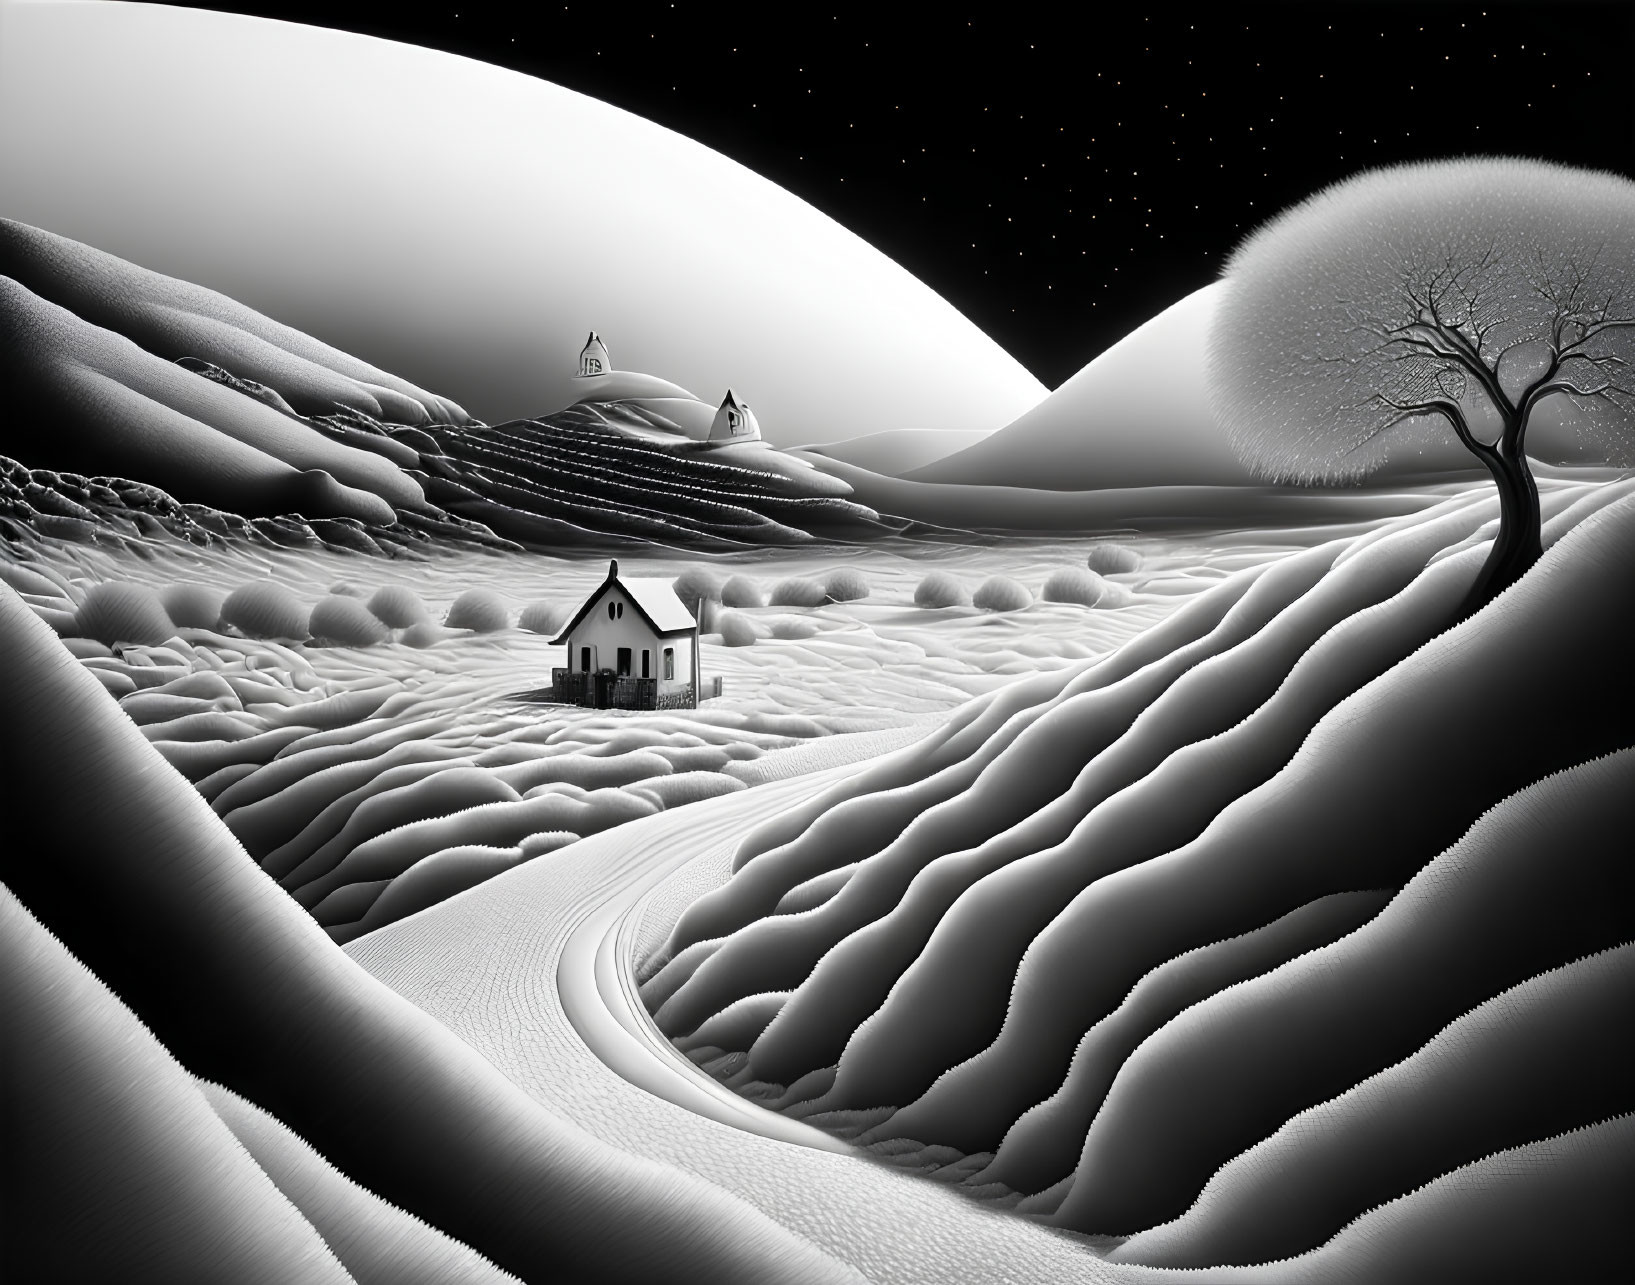 Monochrome landscape with small house, bare tree, rolling hills, and starry sky depicting tranquil winter